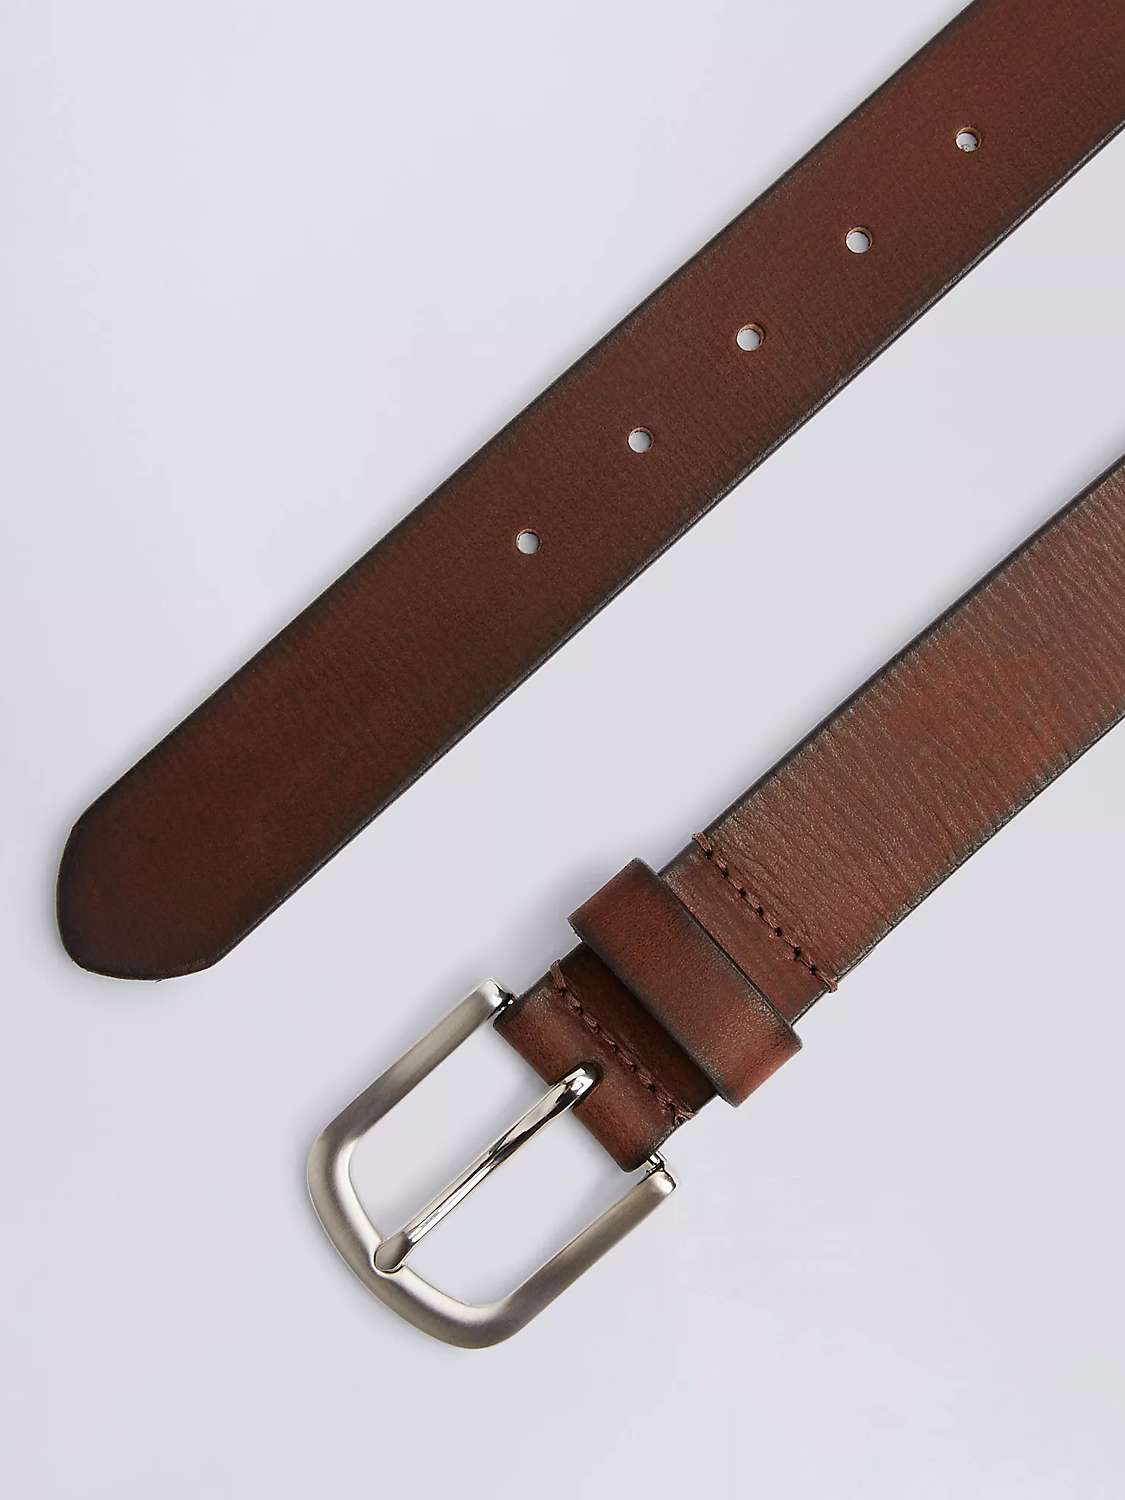 Buy Moss Casual Leather Belt Online at johnlewis.com